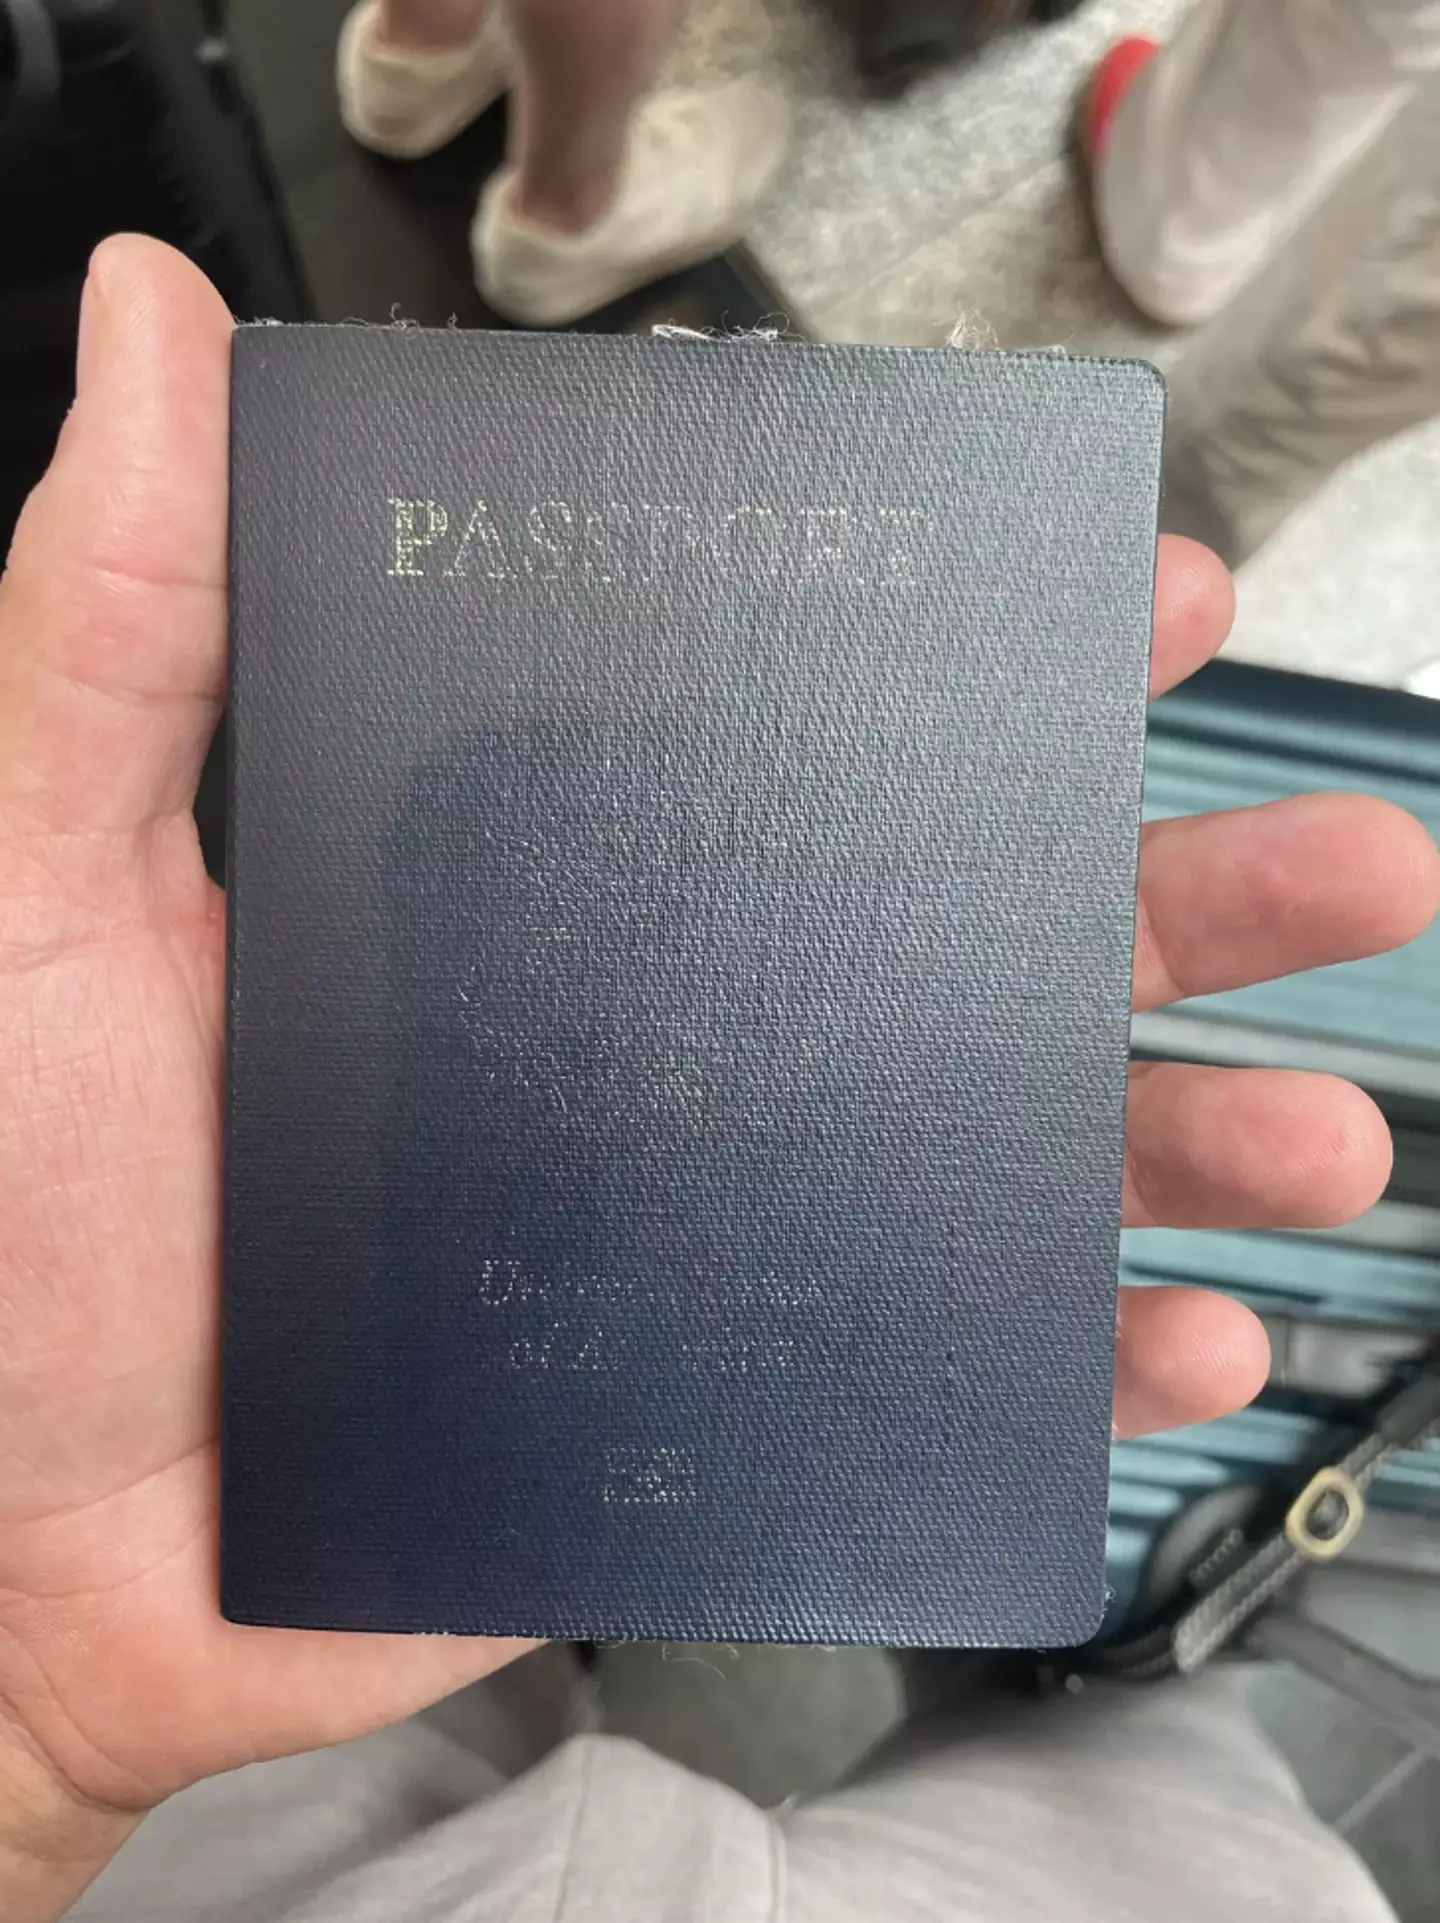 The entire front cover of the man's passport seemingly disappeared. (Reddit/@r/mildlyinfuriating)